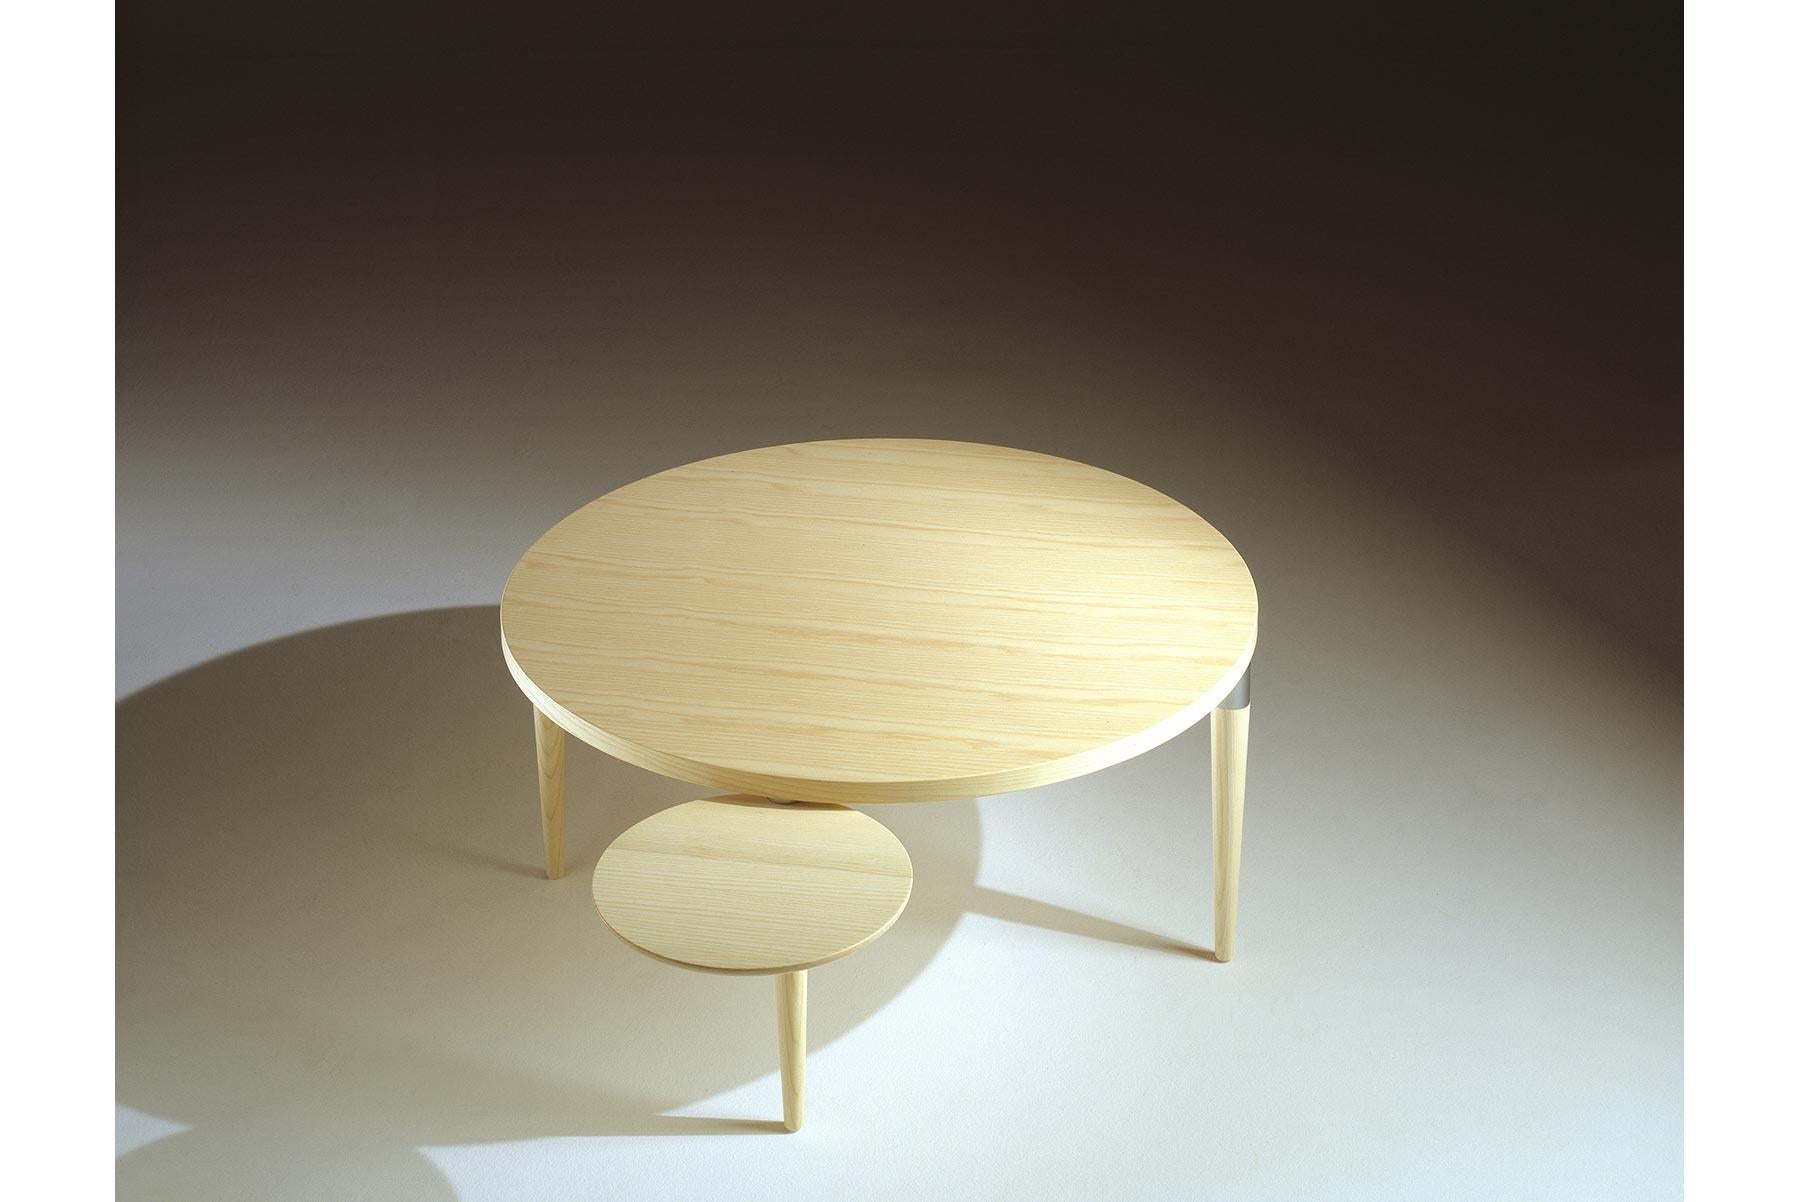 Designed by Nanna Ditzel for GETAMA in 2000, the Mondial coffee table features unparalleled craftsmanship. Table can be purchased with four additional round leaves. This table is hand built at GETAMA’s factory in Gedsted, Denmark by skilled